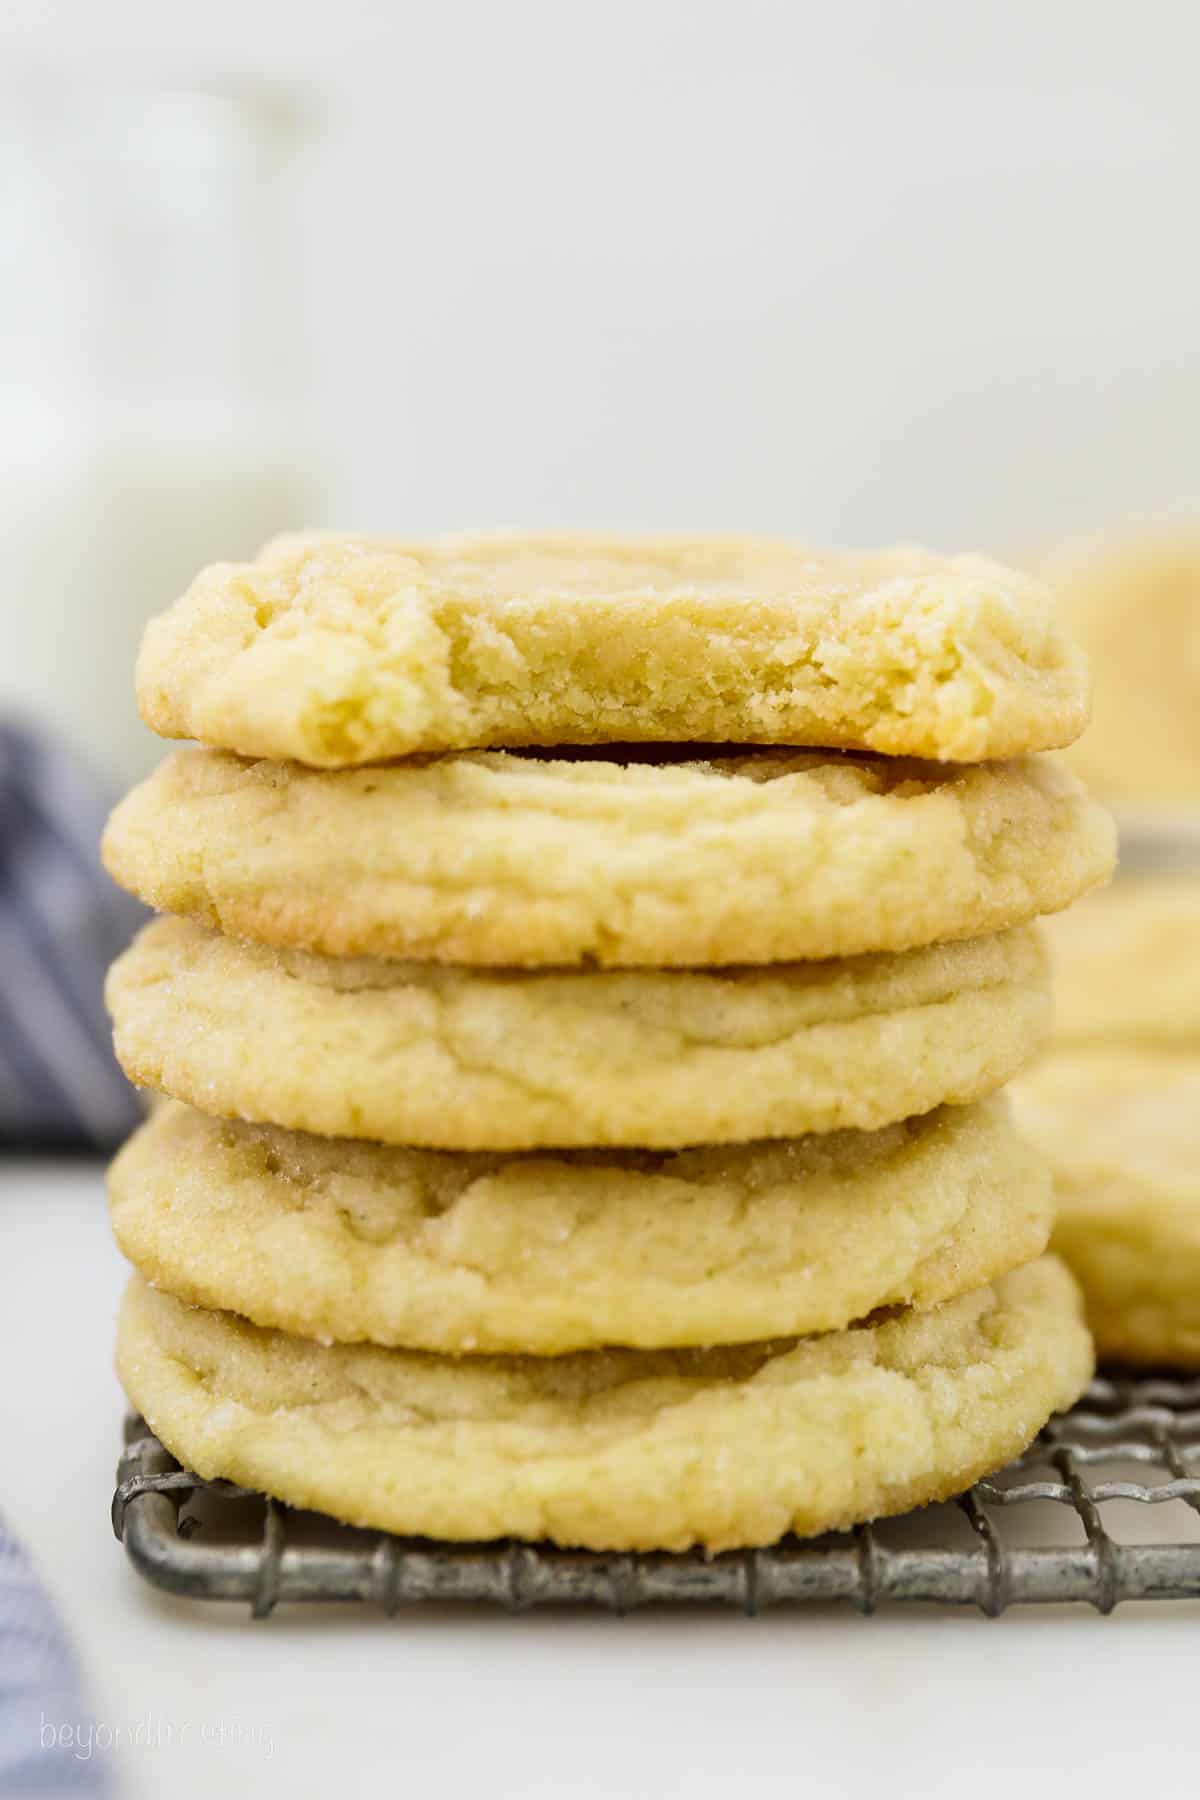 A stack of five sugar cookies with a bite missing from the top cookie.